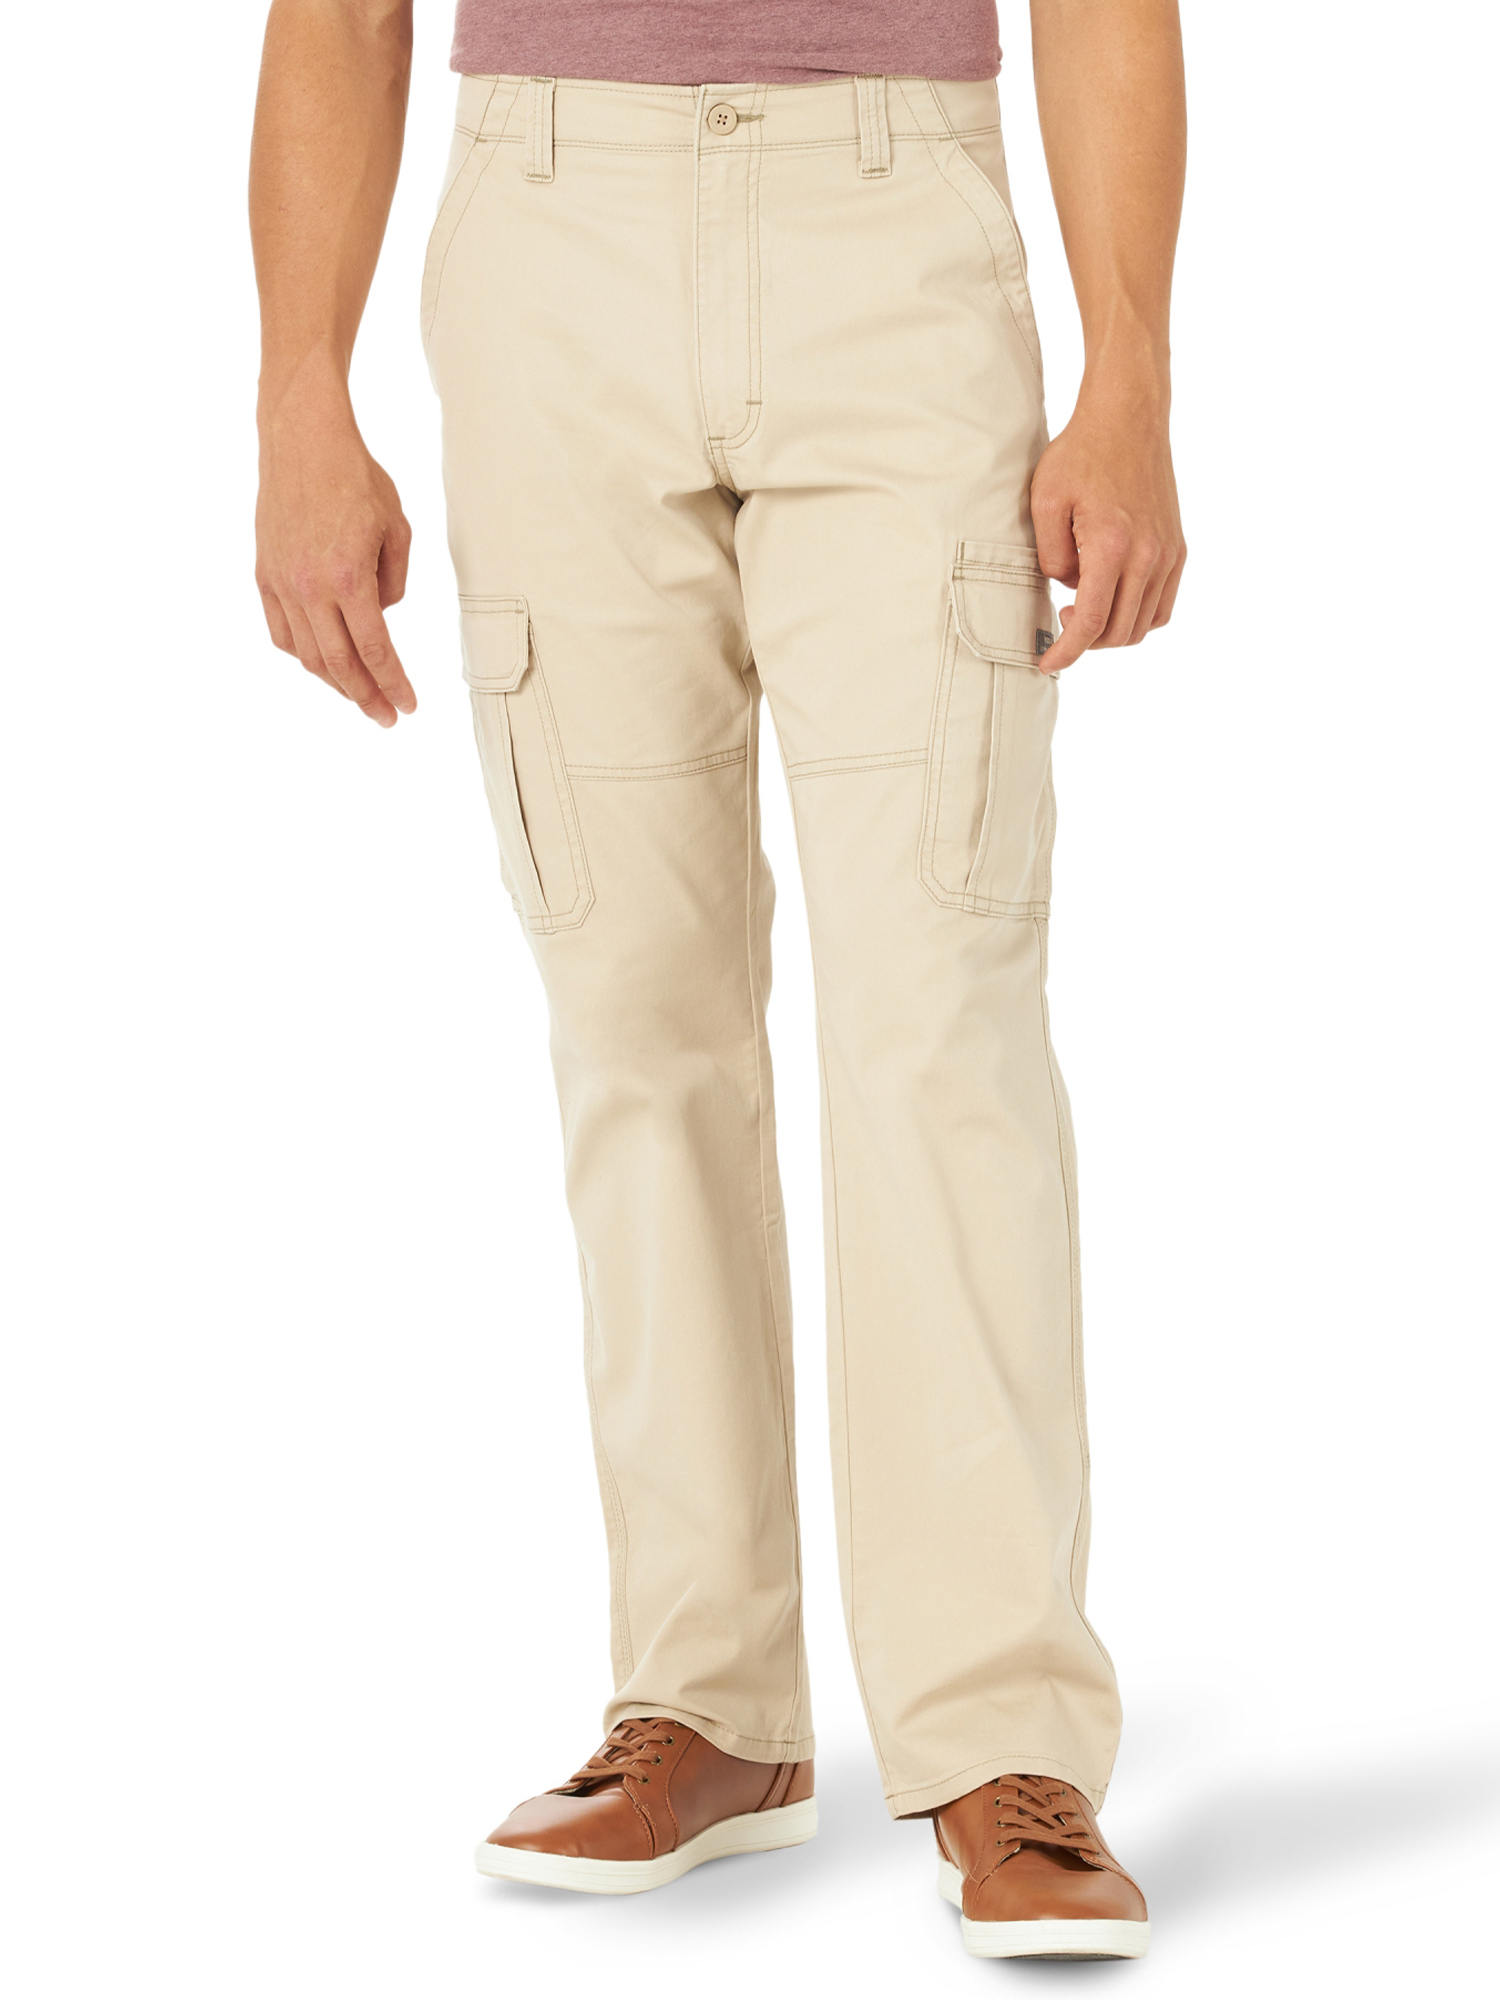 Wrangler Men's and Big Men's Relaxed Fit Cargo Pants With Stretch - image 1 of 10